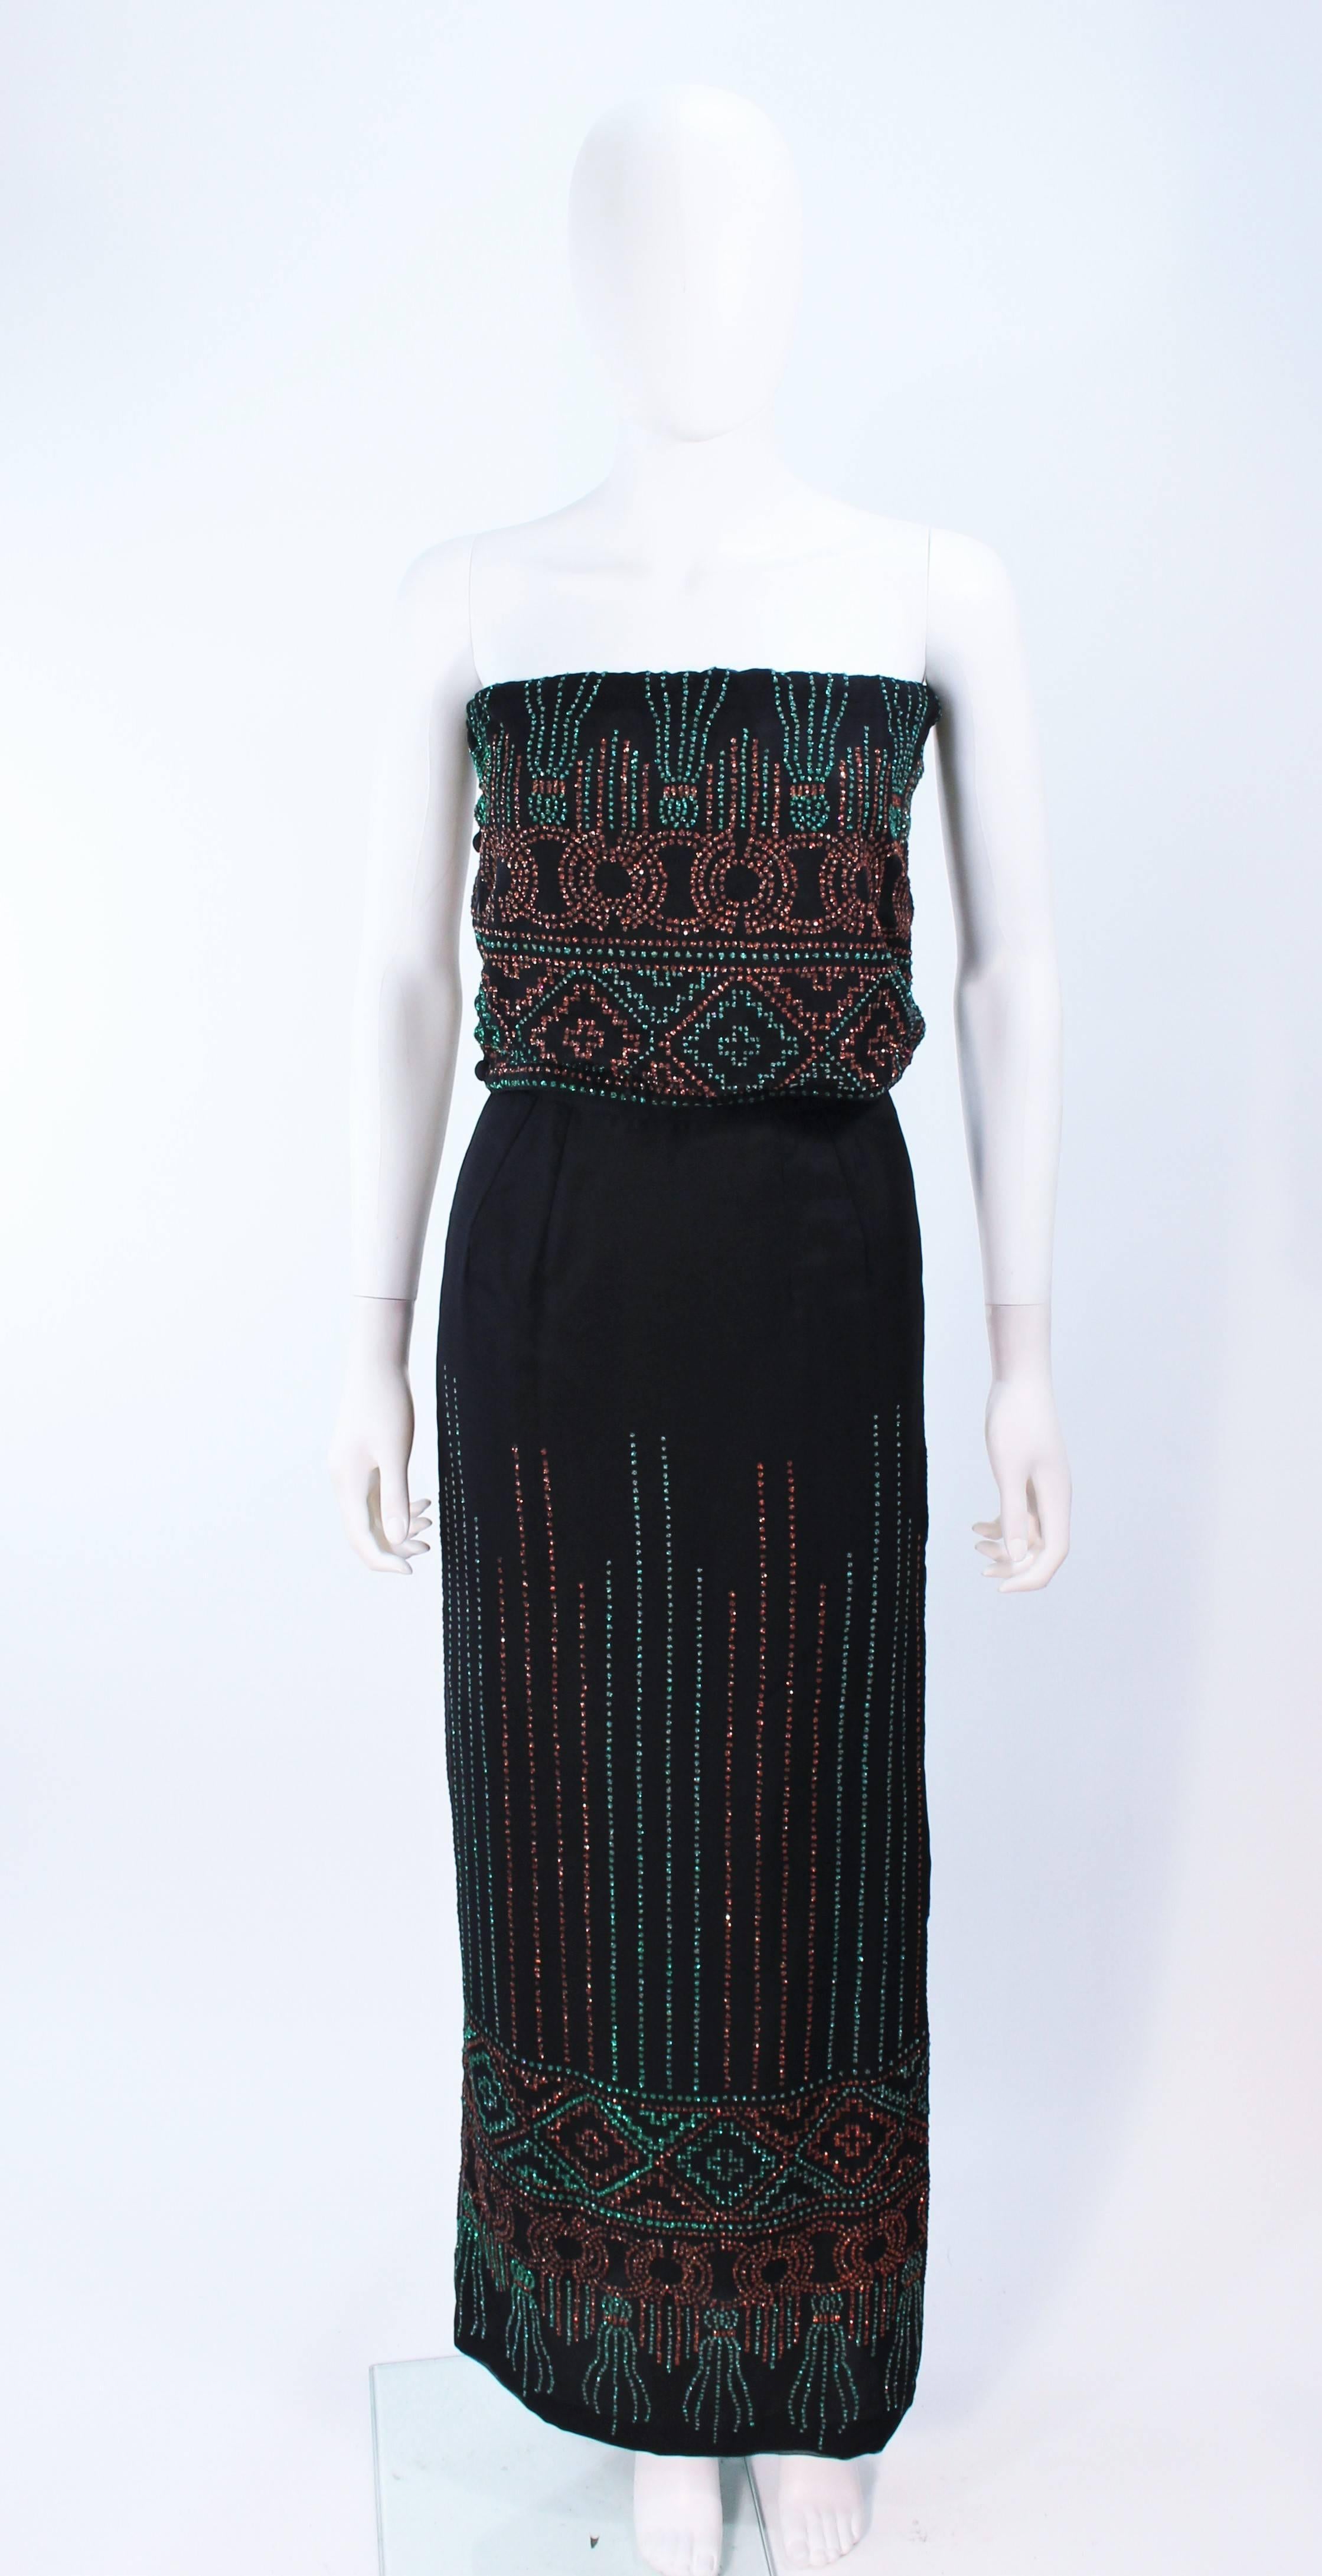 This ensemble is composed of black silk with sequin applique. Features pants, skirt, and tube top with elastic & button closures. Pants and skirt have zipper closures. In excellent vintage condition.

**Please cross-reference measurements for